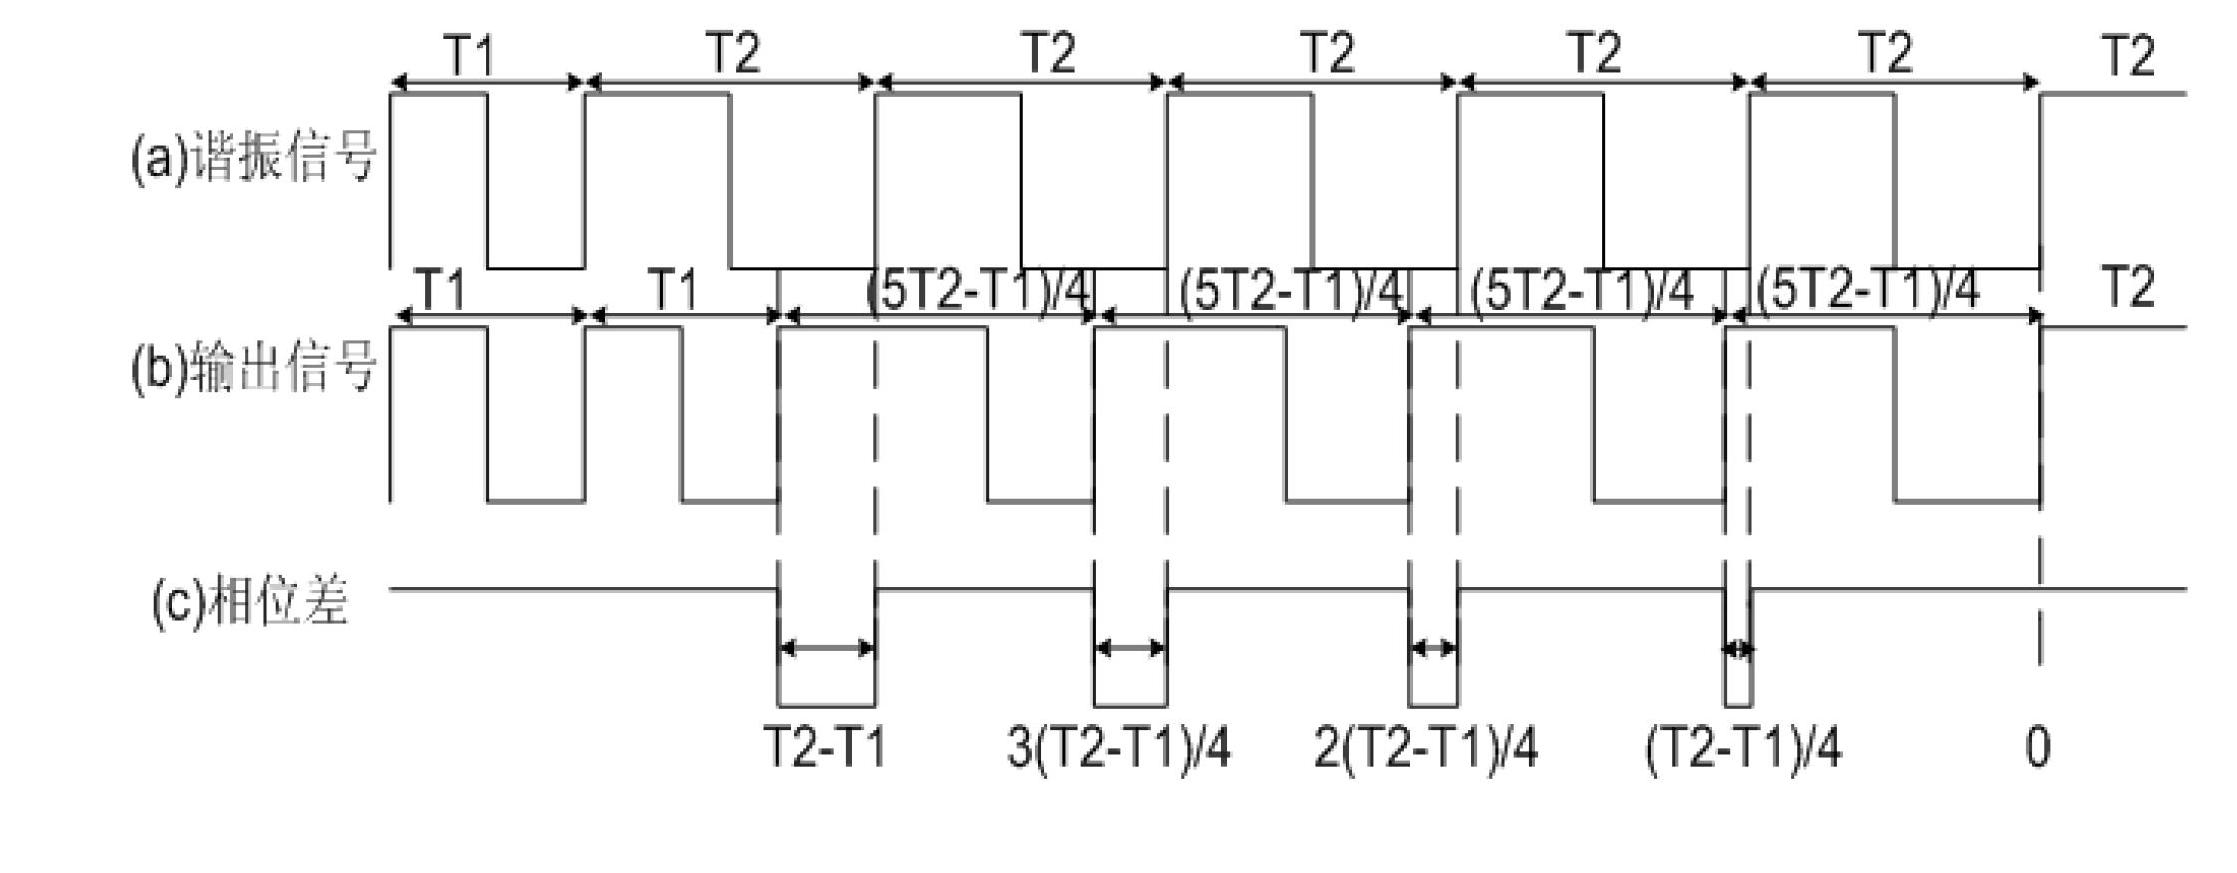 Contactless power transmission (CPT) resonance frequency device based on digital signal processor (DSP) phase lock technique